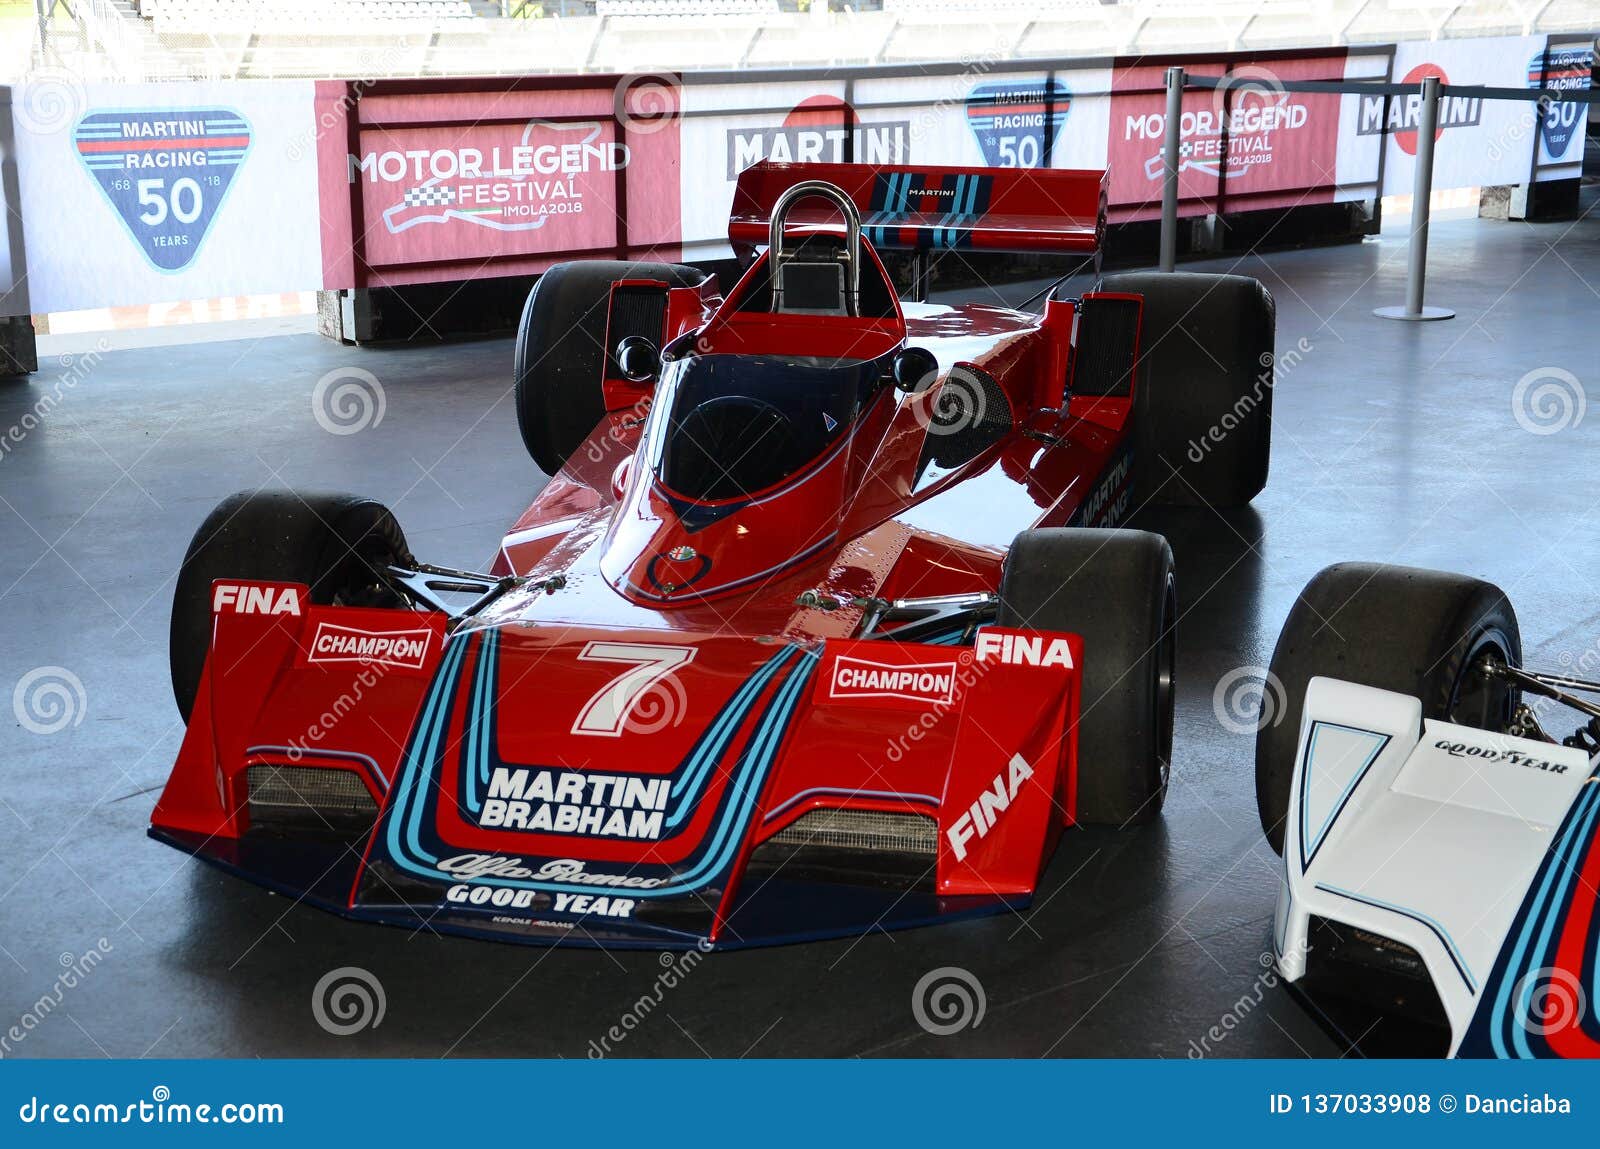 21 April 2018: Historic F1 Cars Brabham BT45 Sponsorized by Martini Racing  Exposed at Motor Legend Festival 2018 at Imola Editorial Image - Image of  circuit, icon: 137033425